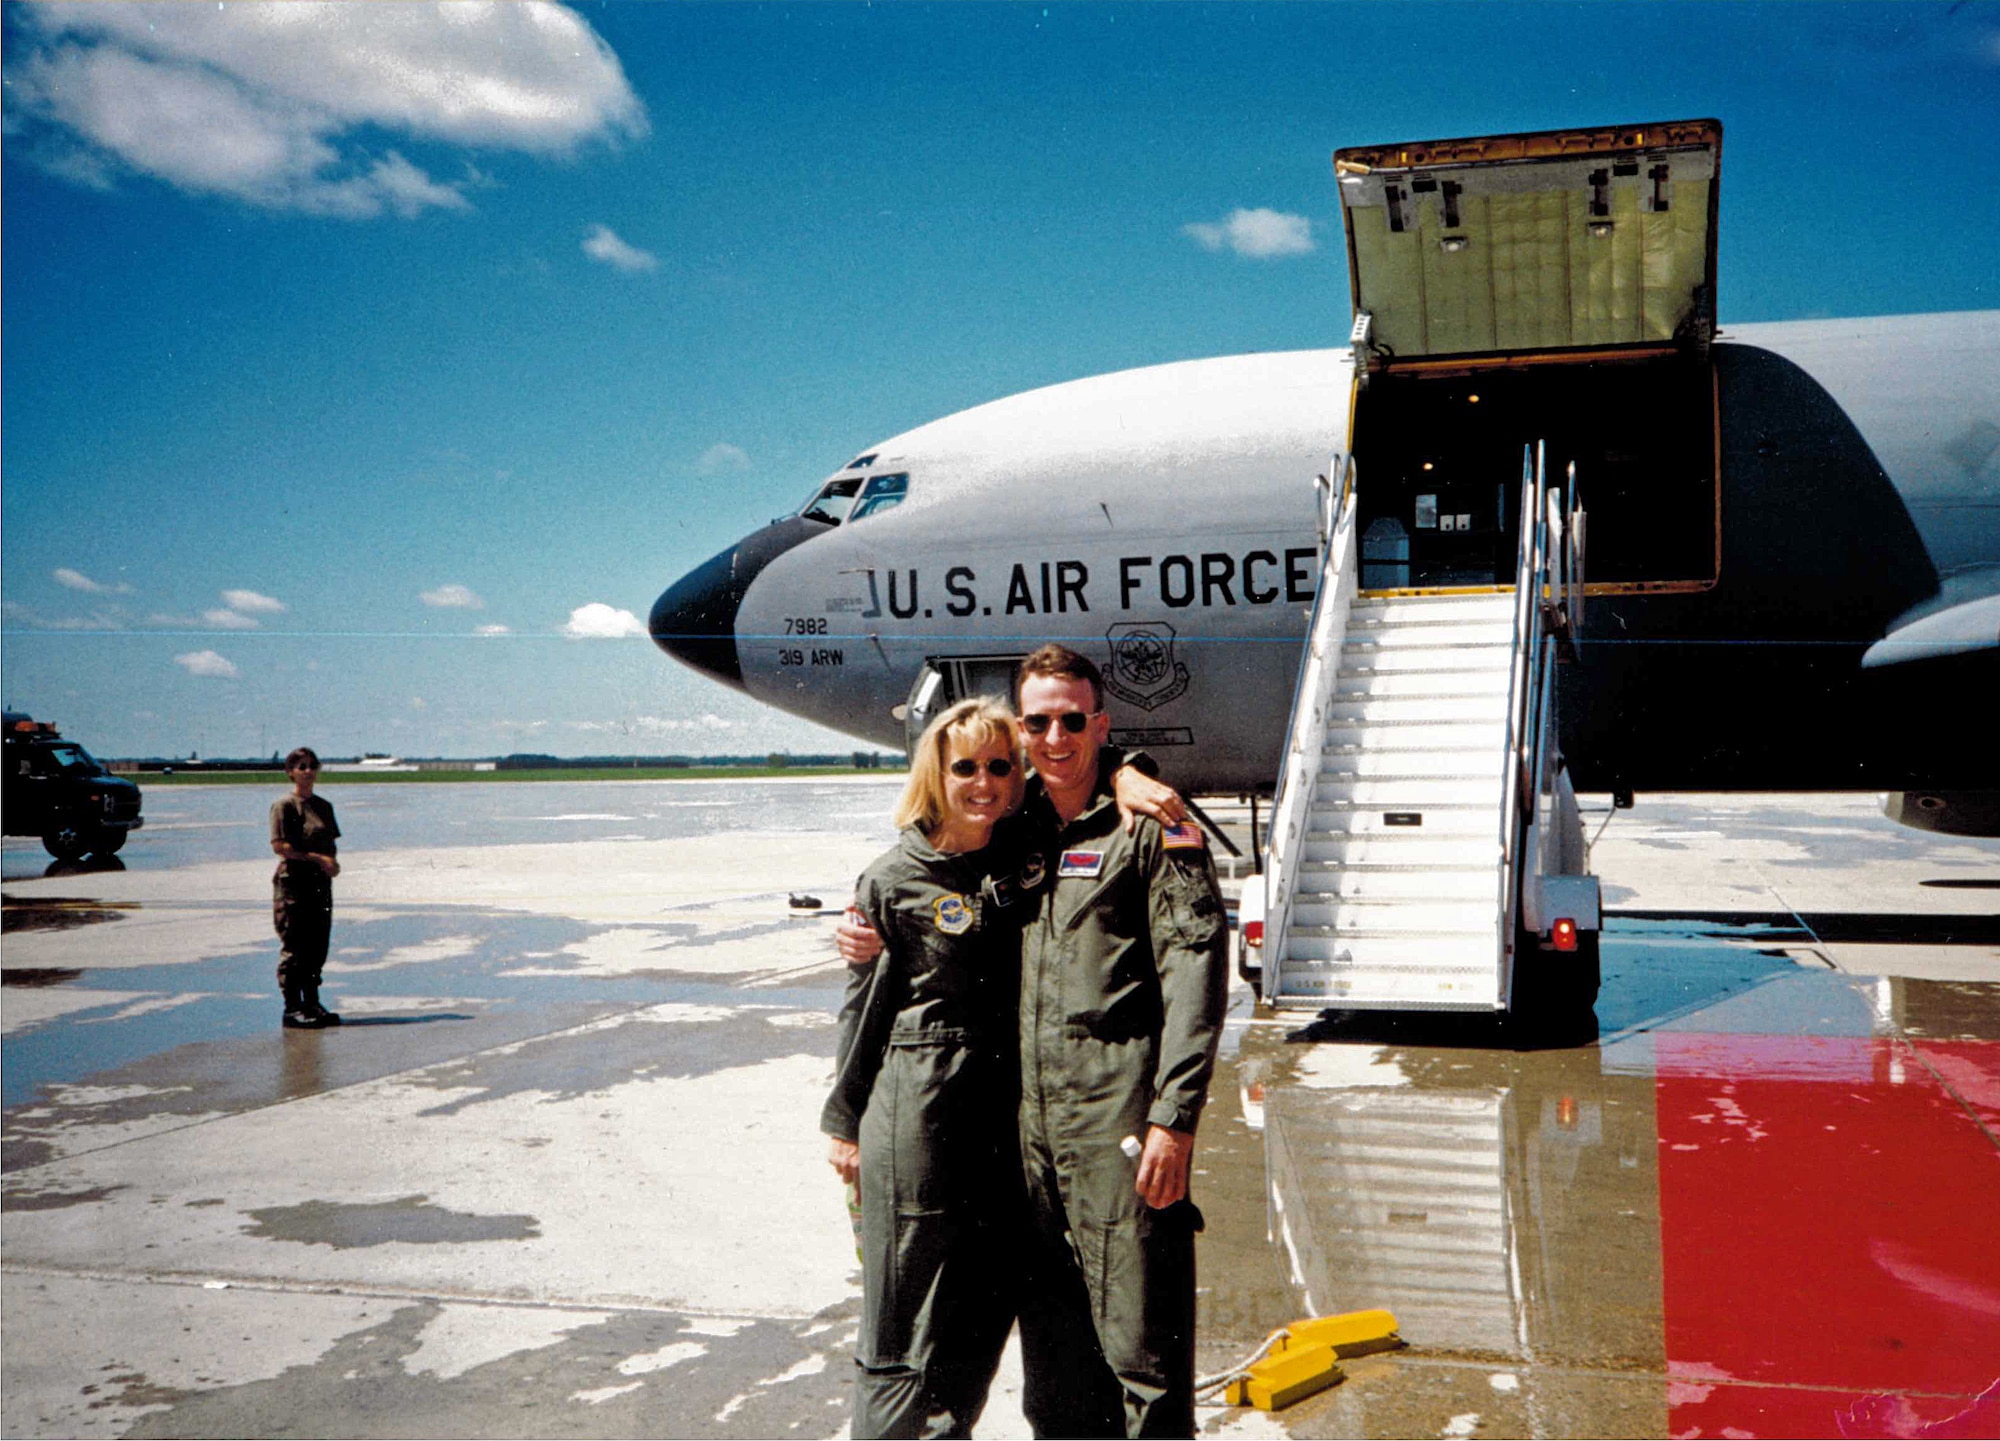 Col. Laura Lenderman, 375th Air Mobility Wing commander, with her husband Col. Dave Lenderman in front of a KC-135. After graduating pilot training, the Lendermans both chose to fly the KC-135 refueling aircraft and were assigned to Grand Forks AFB, North Dakota. Flying the KC-135 together, the Lendermans got the unique opportunity to spend most of their assignments together, including overseas deployments, where they would serve together in places such as France, Saudi Arabia, and Turkey. (Courtesy photo)